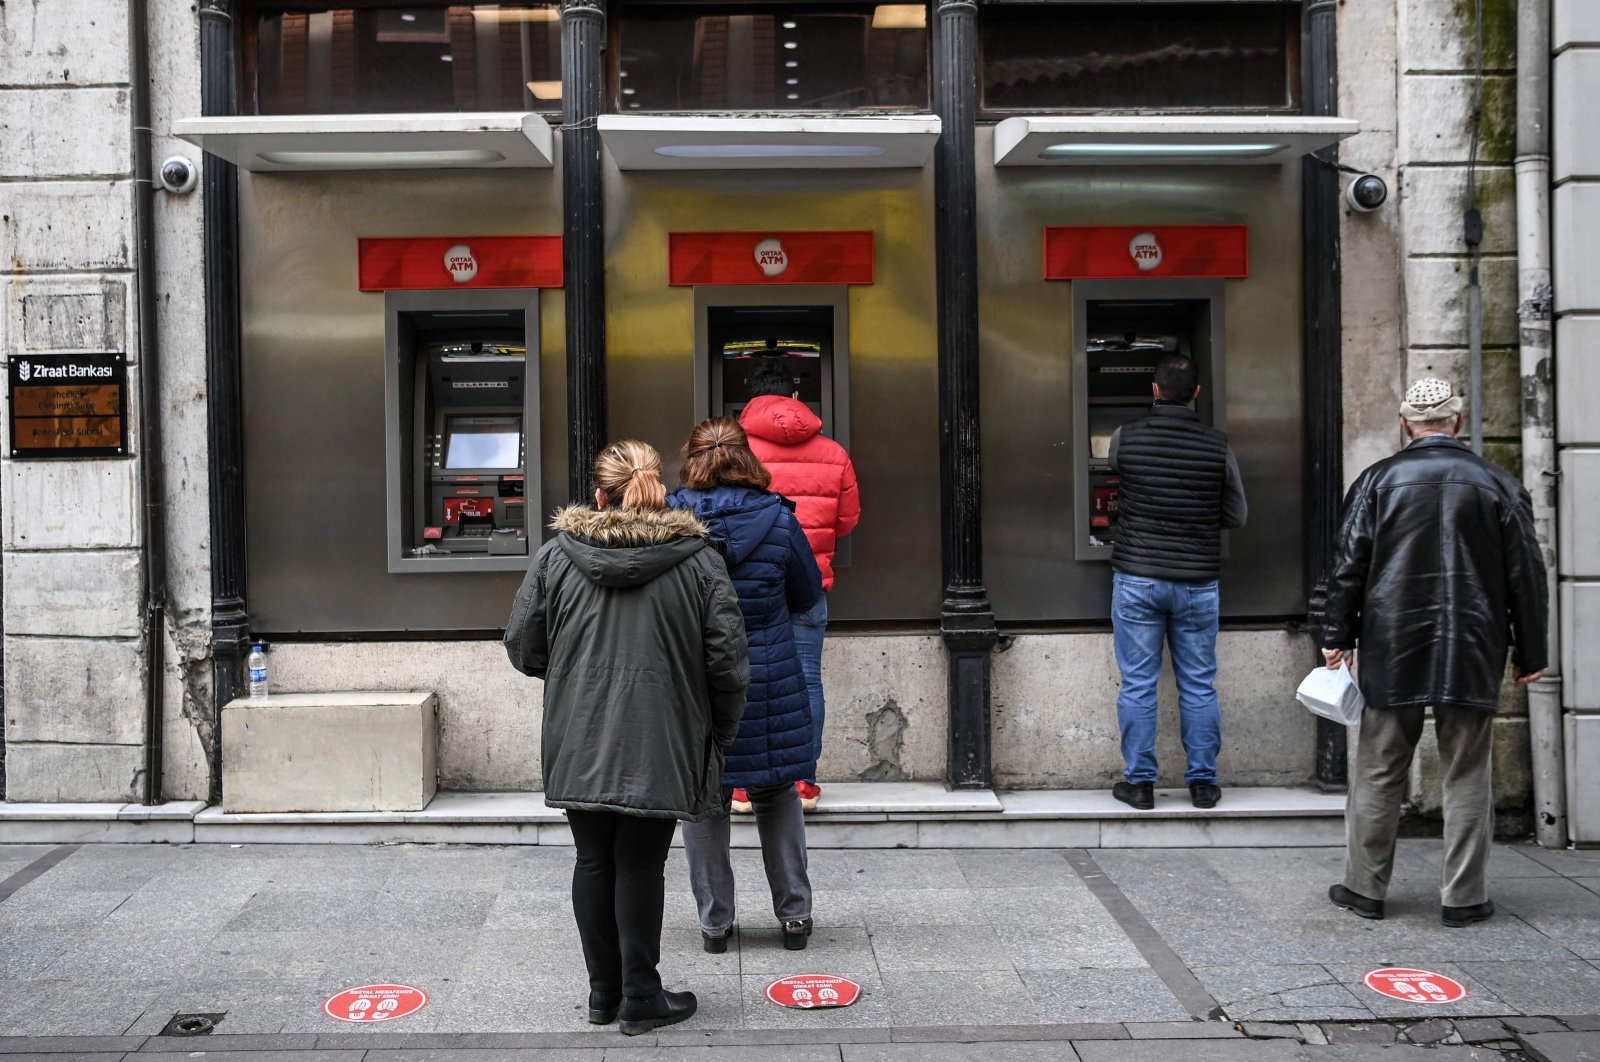 Customers wait in line to use the ATMs of a Turkish bank near the Eminönü neighborhood, in Istanbul, Turkey, March 22, 2021. (AFP Photo)